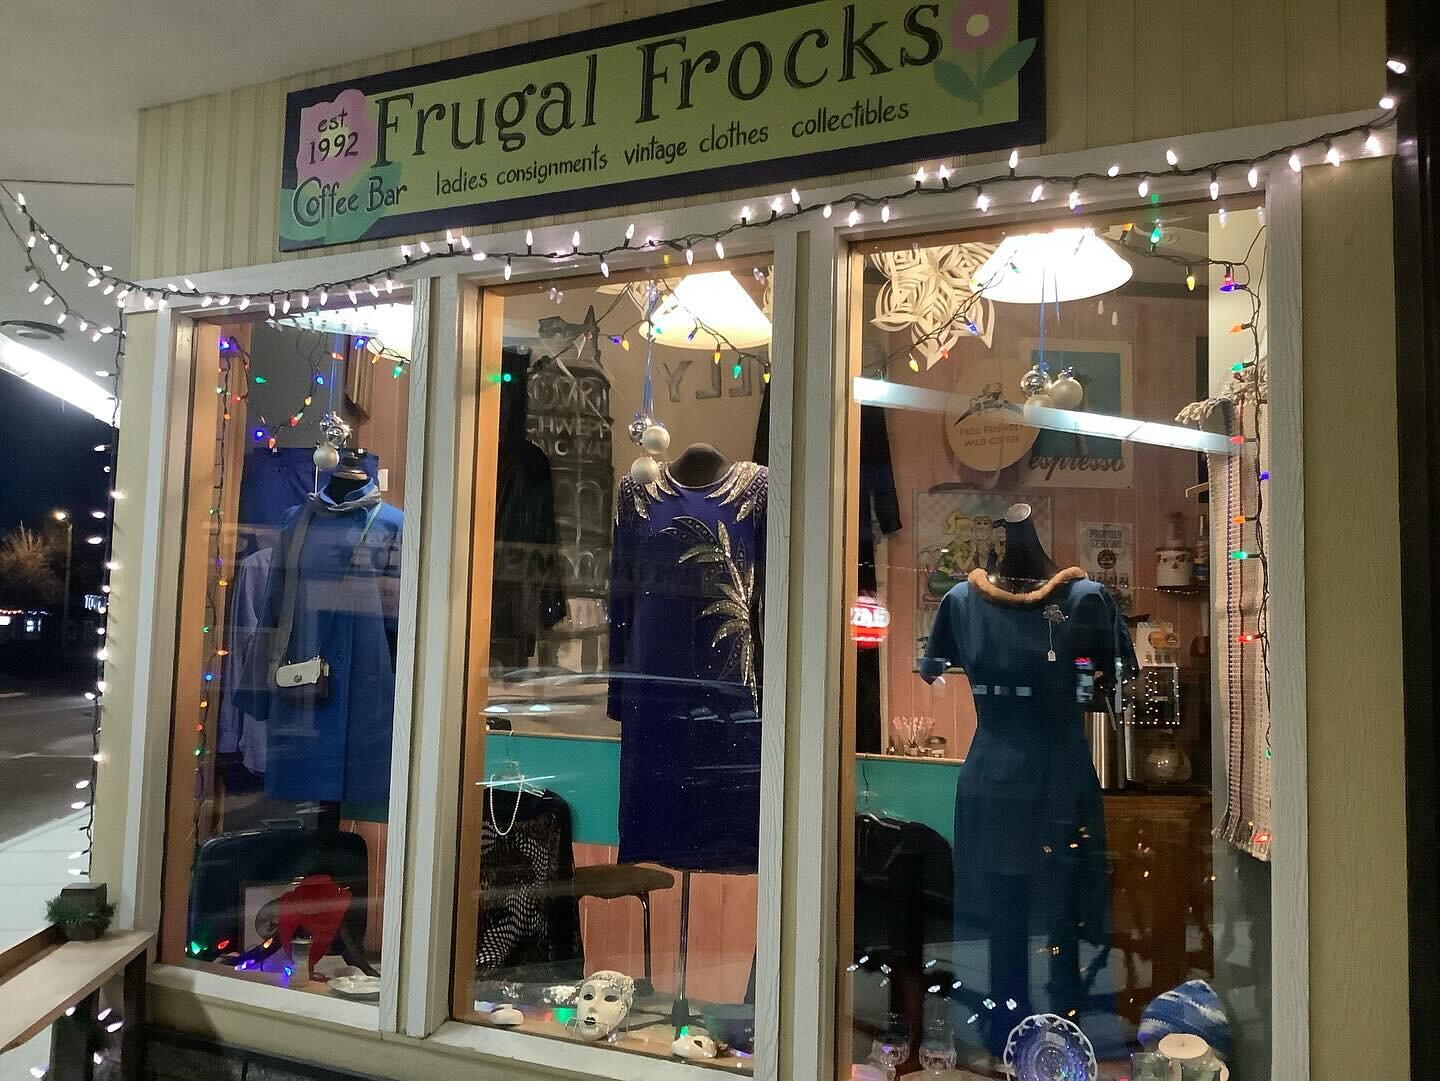 Happy New Years from Frugal Frocks 🥳! We went from glam to &ldquo;SLAM&rdquo; it got cold. We got a great selection of winter coats, cozy sweaters, to help you through winter blues snow and rain. Hours are 9 till 4 Monday thru Saturday&hellip;.. Gra